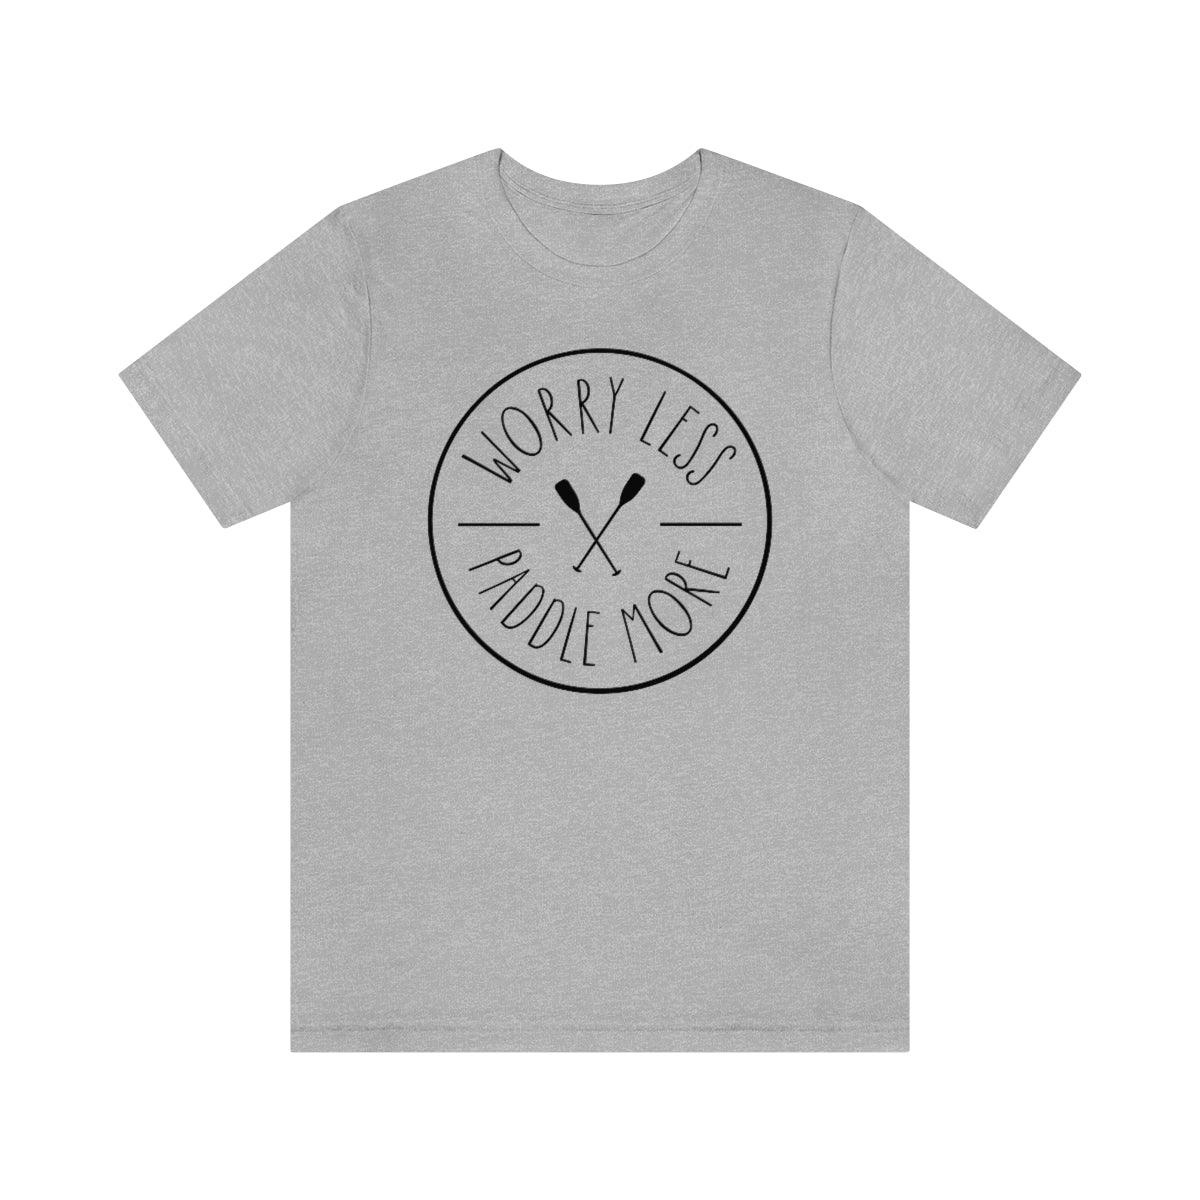 Worry Less Paddle More Short Sleeve Tee